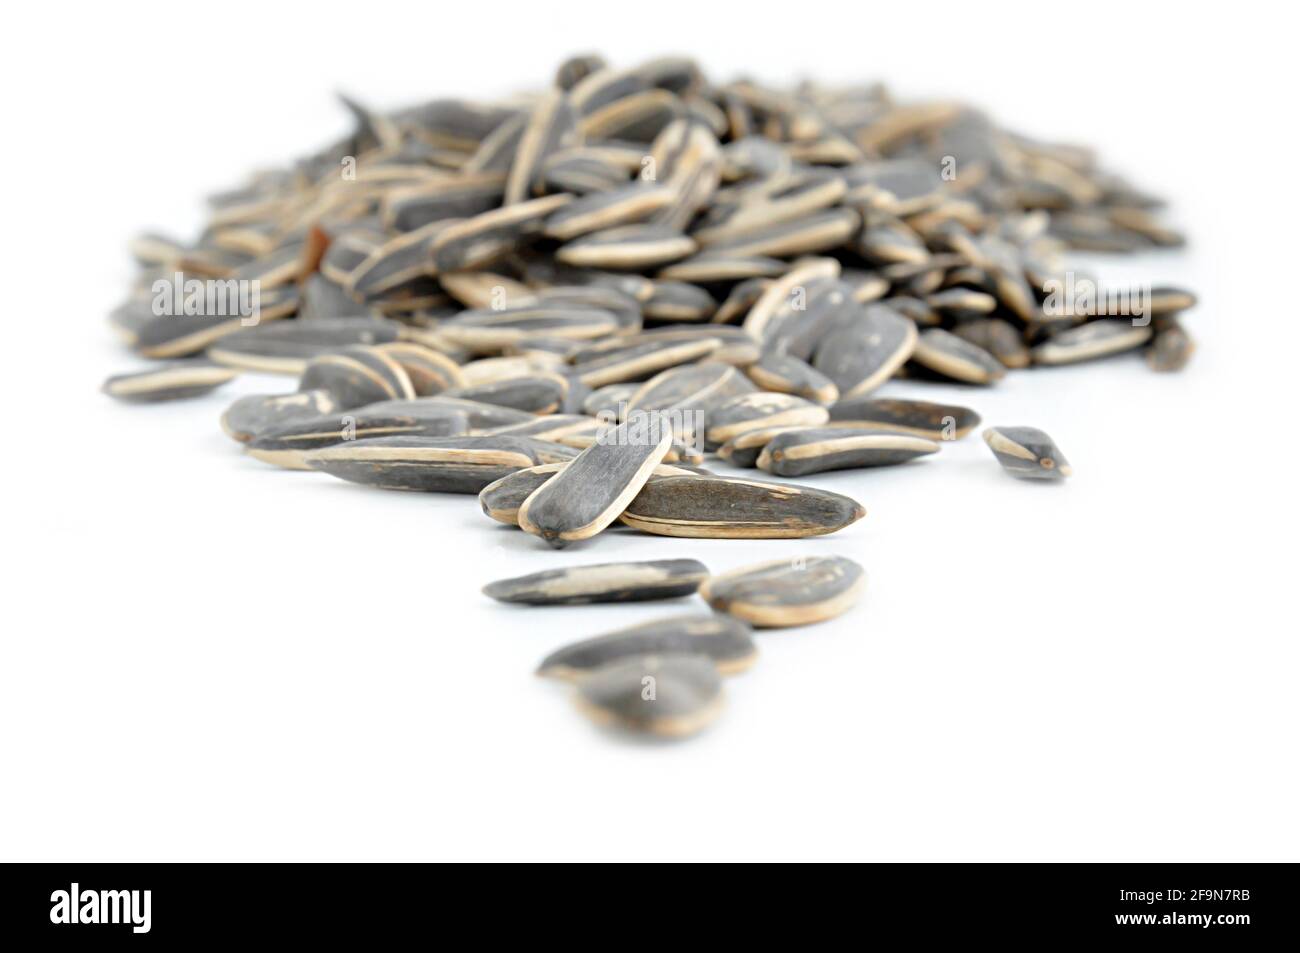 Heap of sunflower seeds on white background Stock Photo